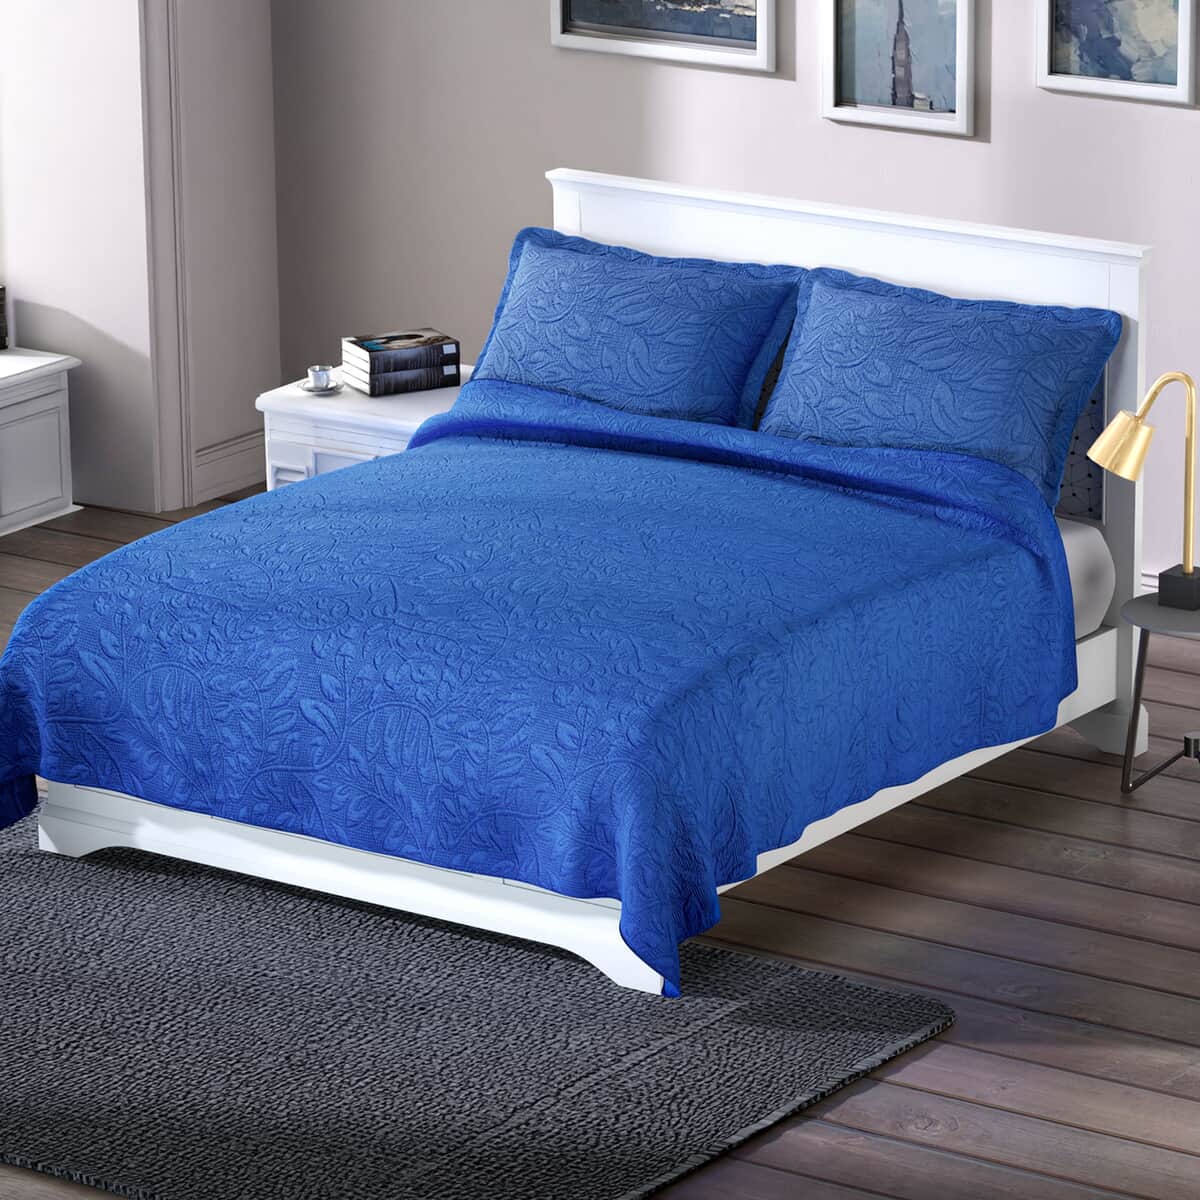 Homesmart Blue 3D Pinsonic Embossed Pattern Quilt with 2 Shams - Queen (Microfiber) image number 0